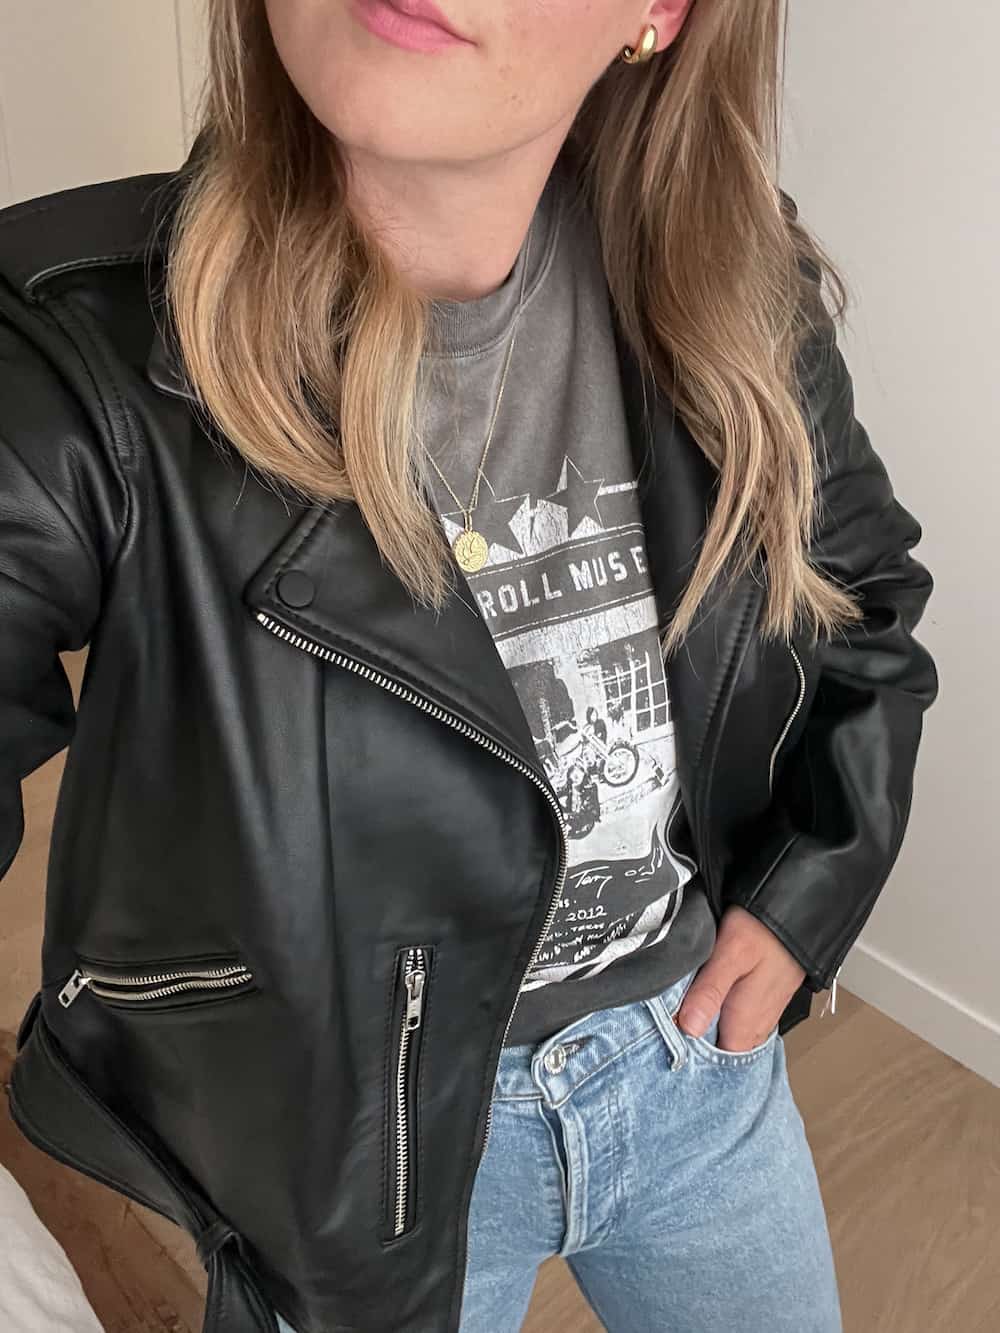 woman wearing a graphic tee with a leather jacket and jeans as part of a capsule wardrobe for fall